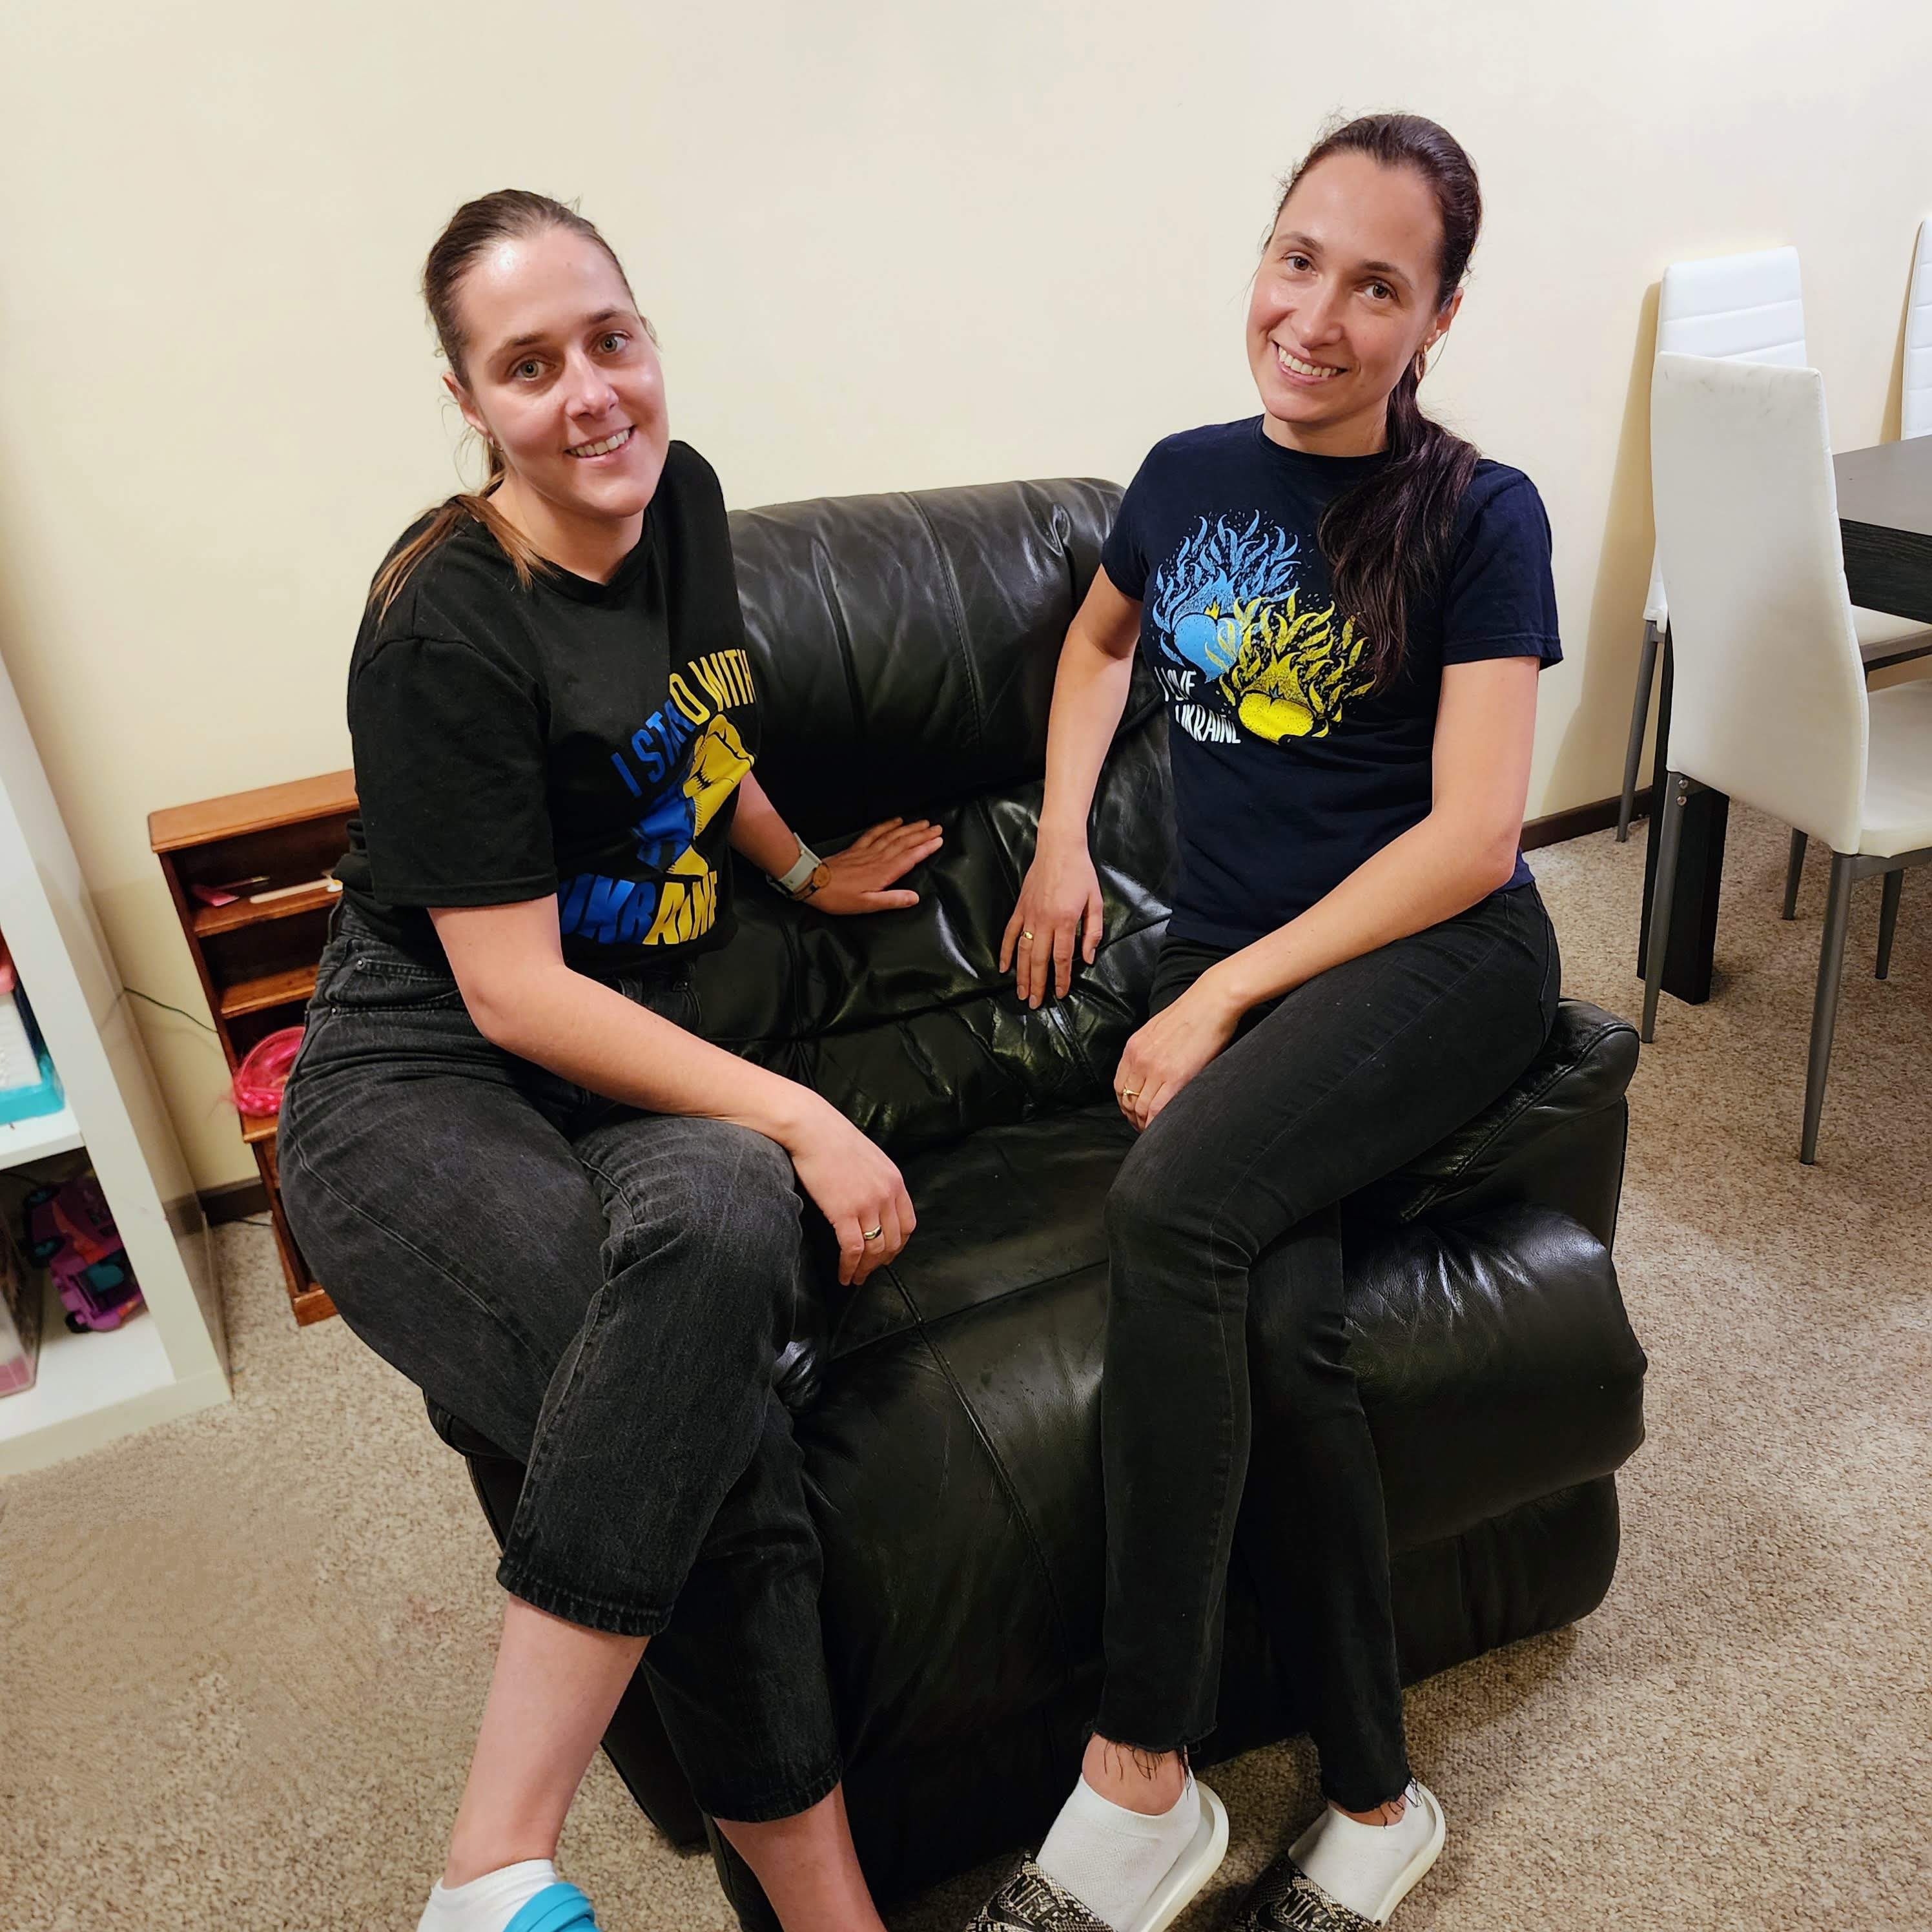 Yustyna and Yaryna siting on their couch and smiling